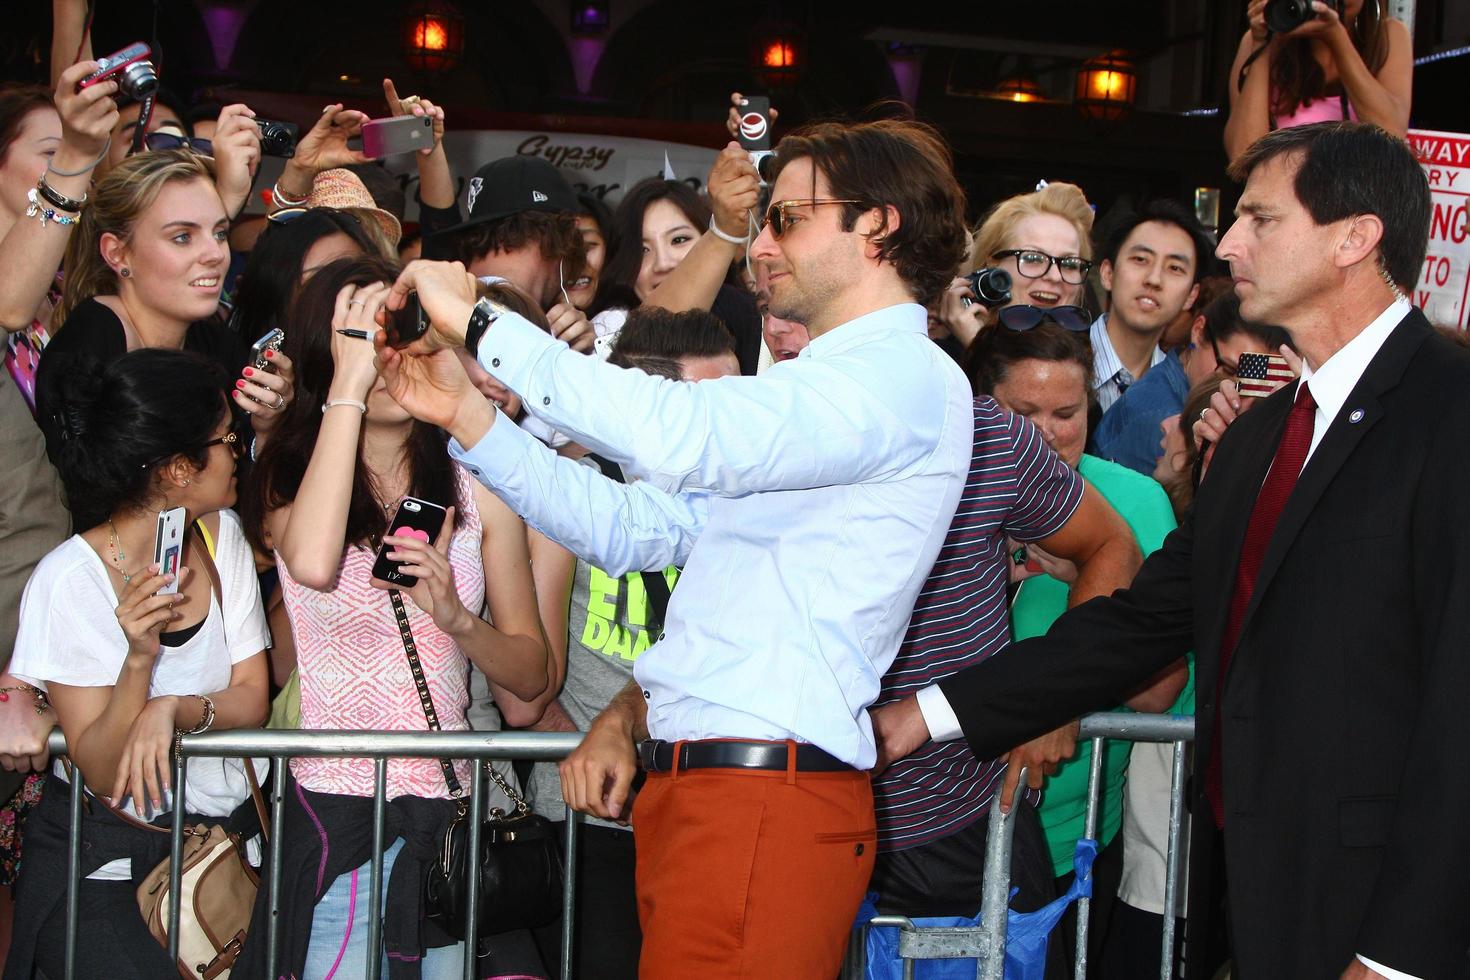 LOS ANGELES, MAY 16 - Bradley Cooper interacts with fans at the Hangover III LA premiere at the Village Theater on May 16, 2013 in Westwood, CA photo